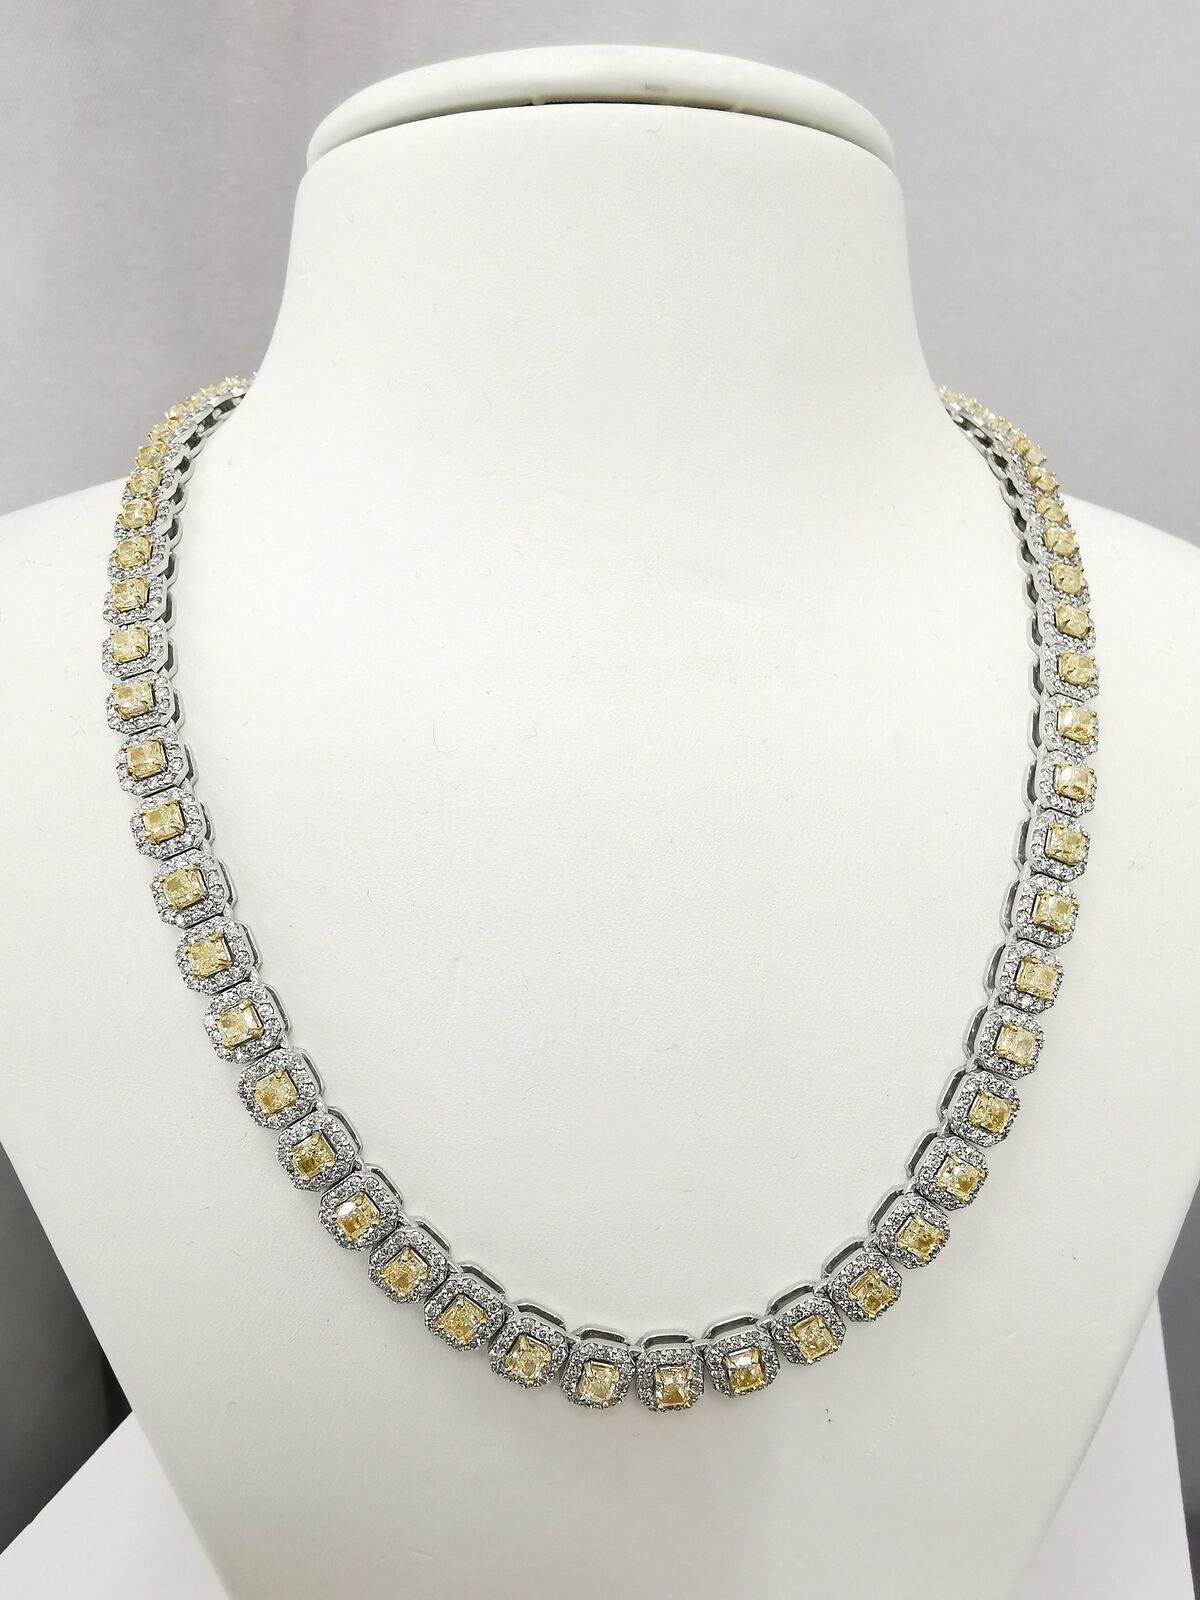 26.08 Ct Tennis Necklace 14k White Gold Natural Fancy Yellow VS1-VS2